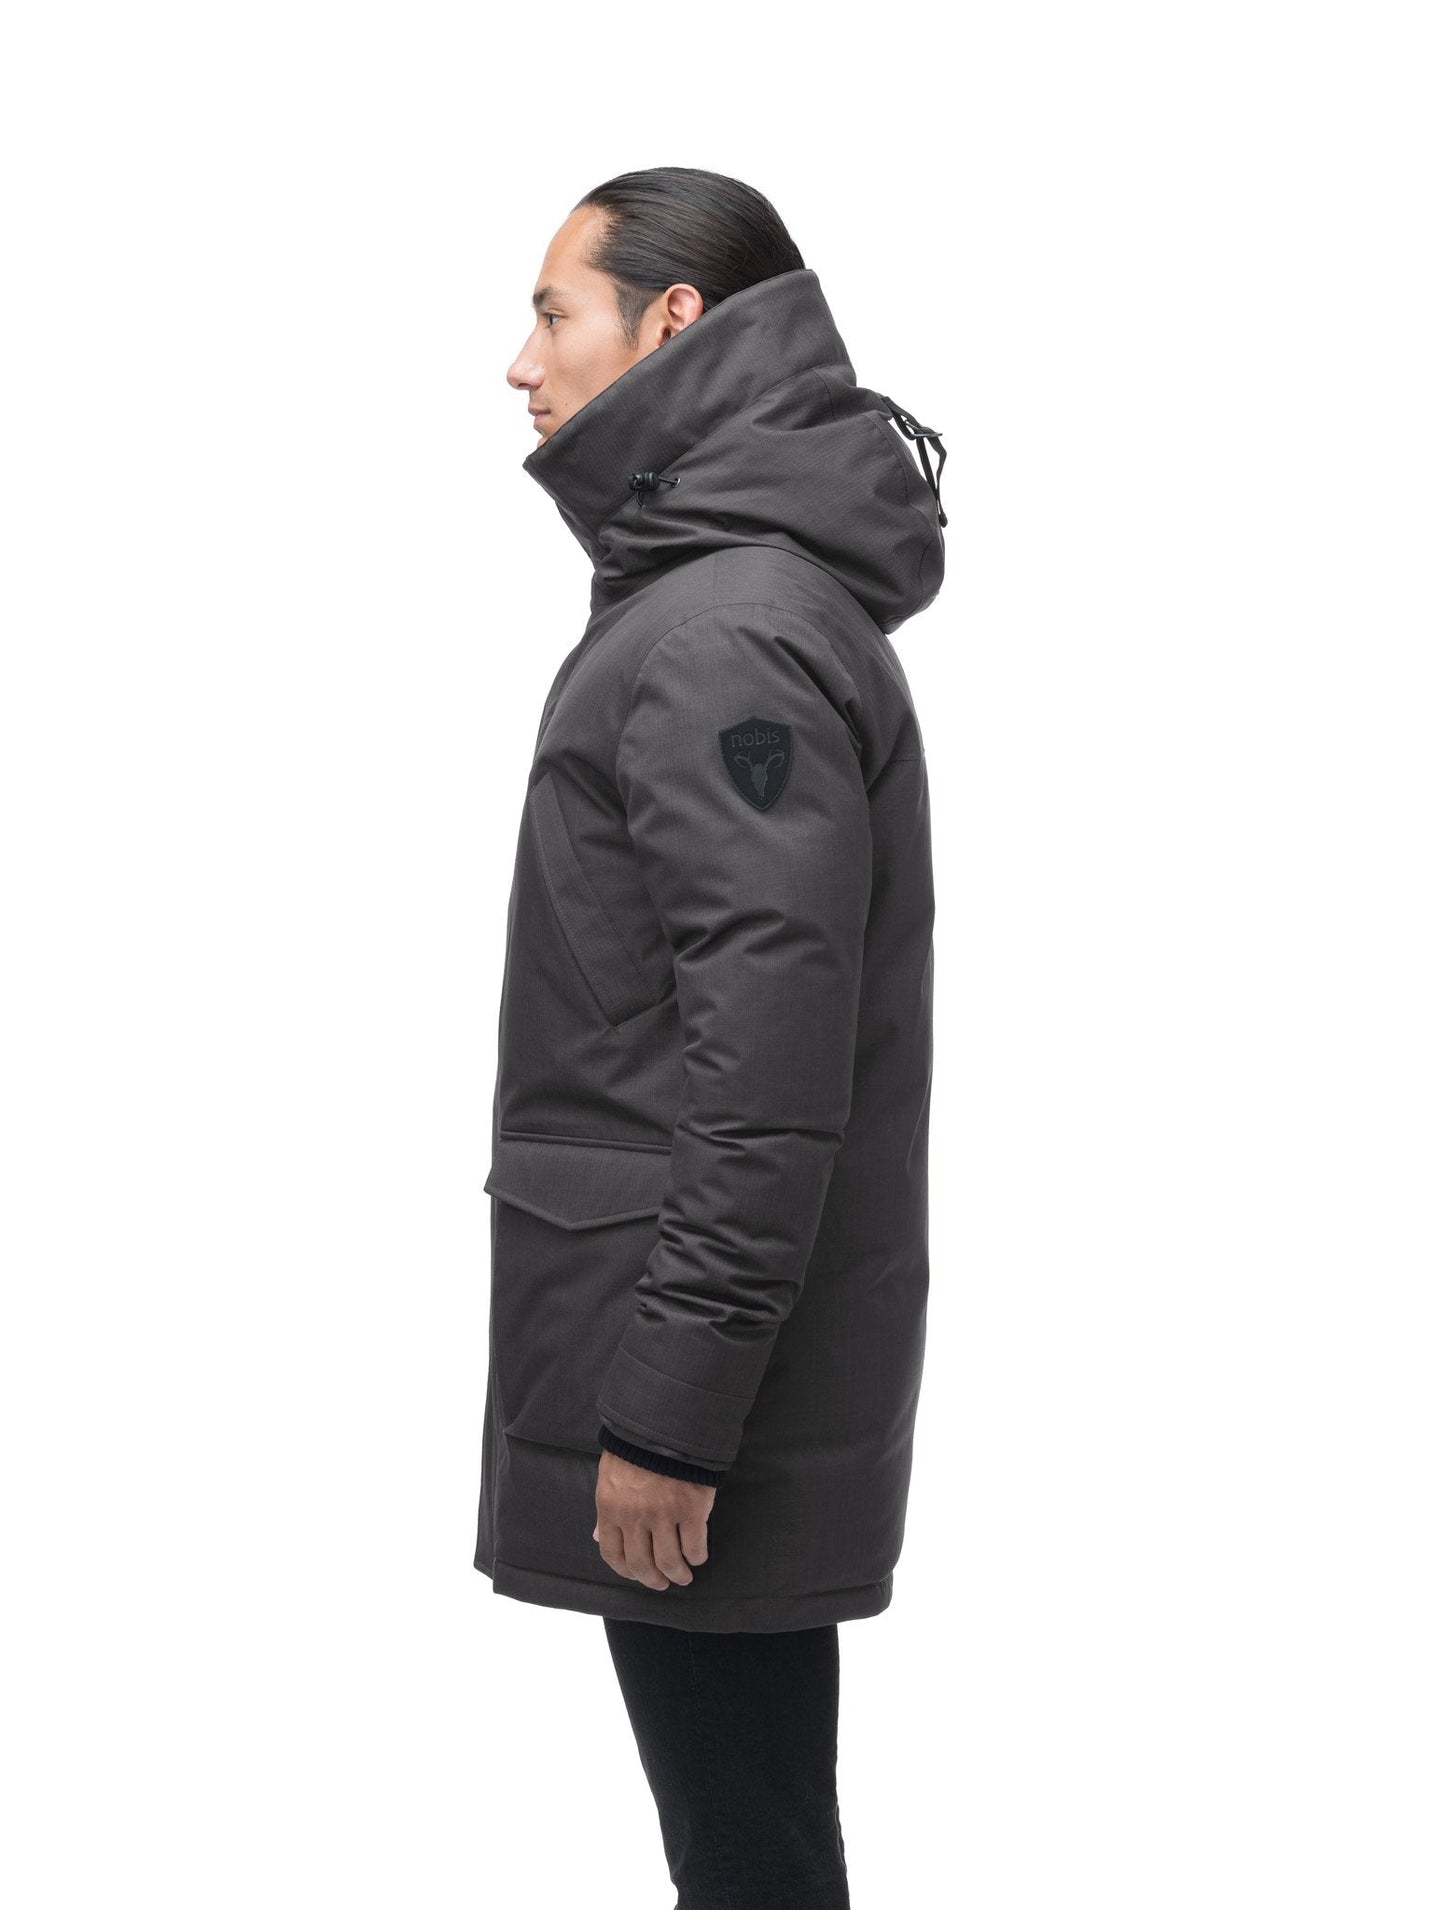 Men's thigh length down-filled parka with non-removable hood in Steel Grey